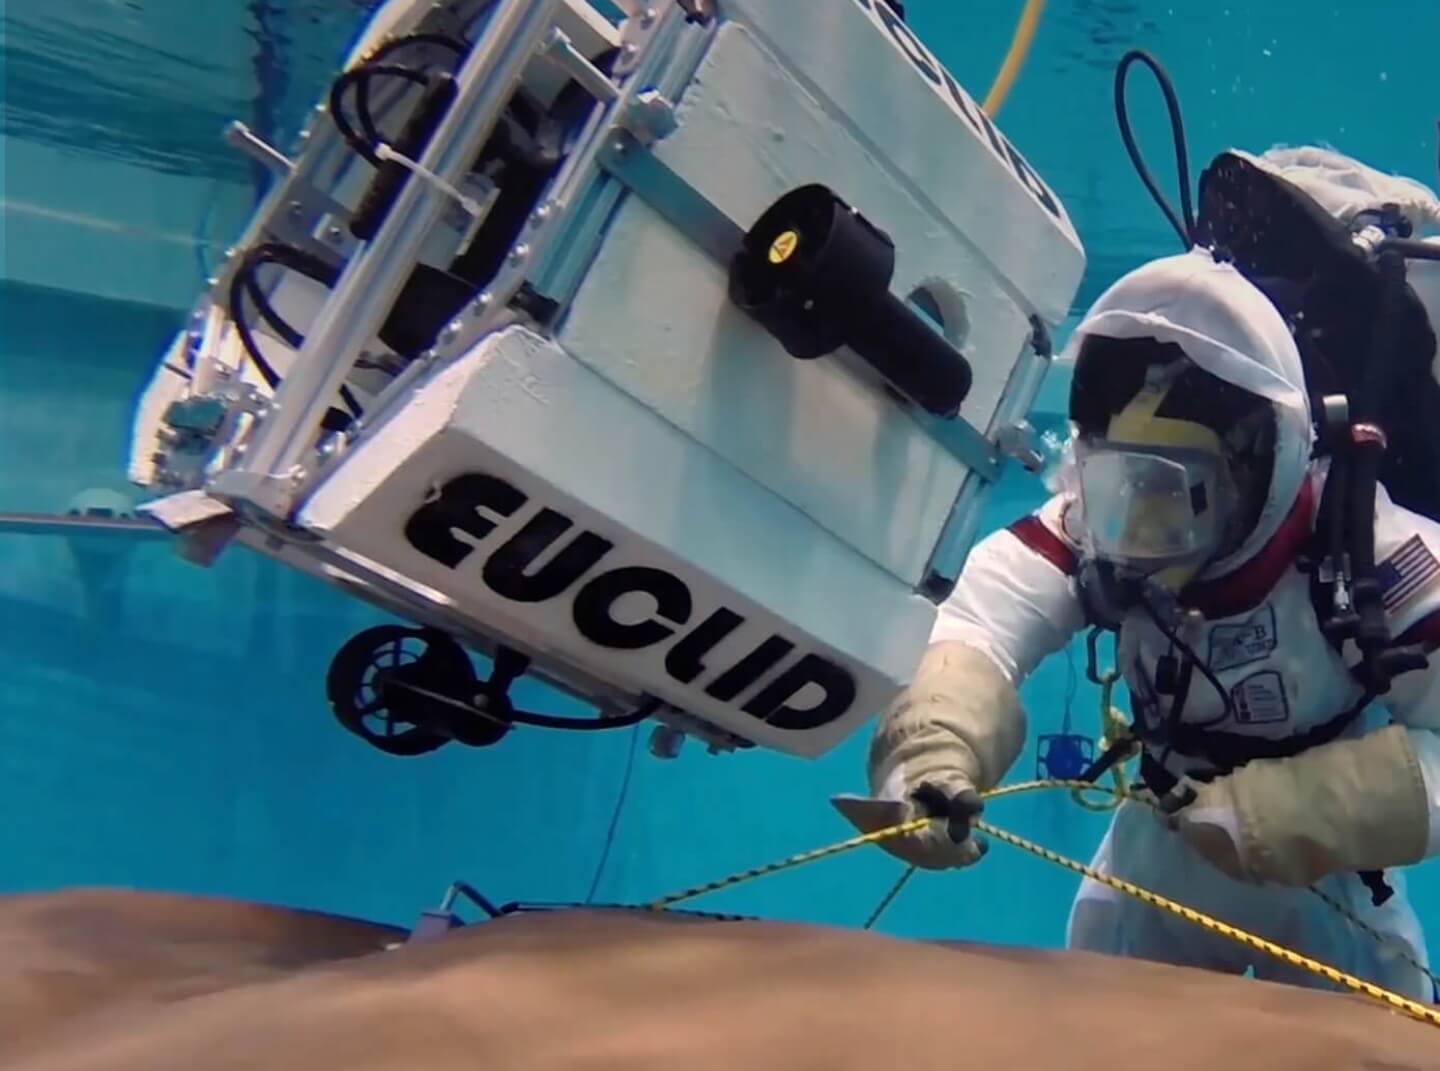 A University of Maryland student in a space suit ties rope during an underwater equipment test